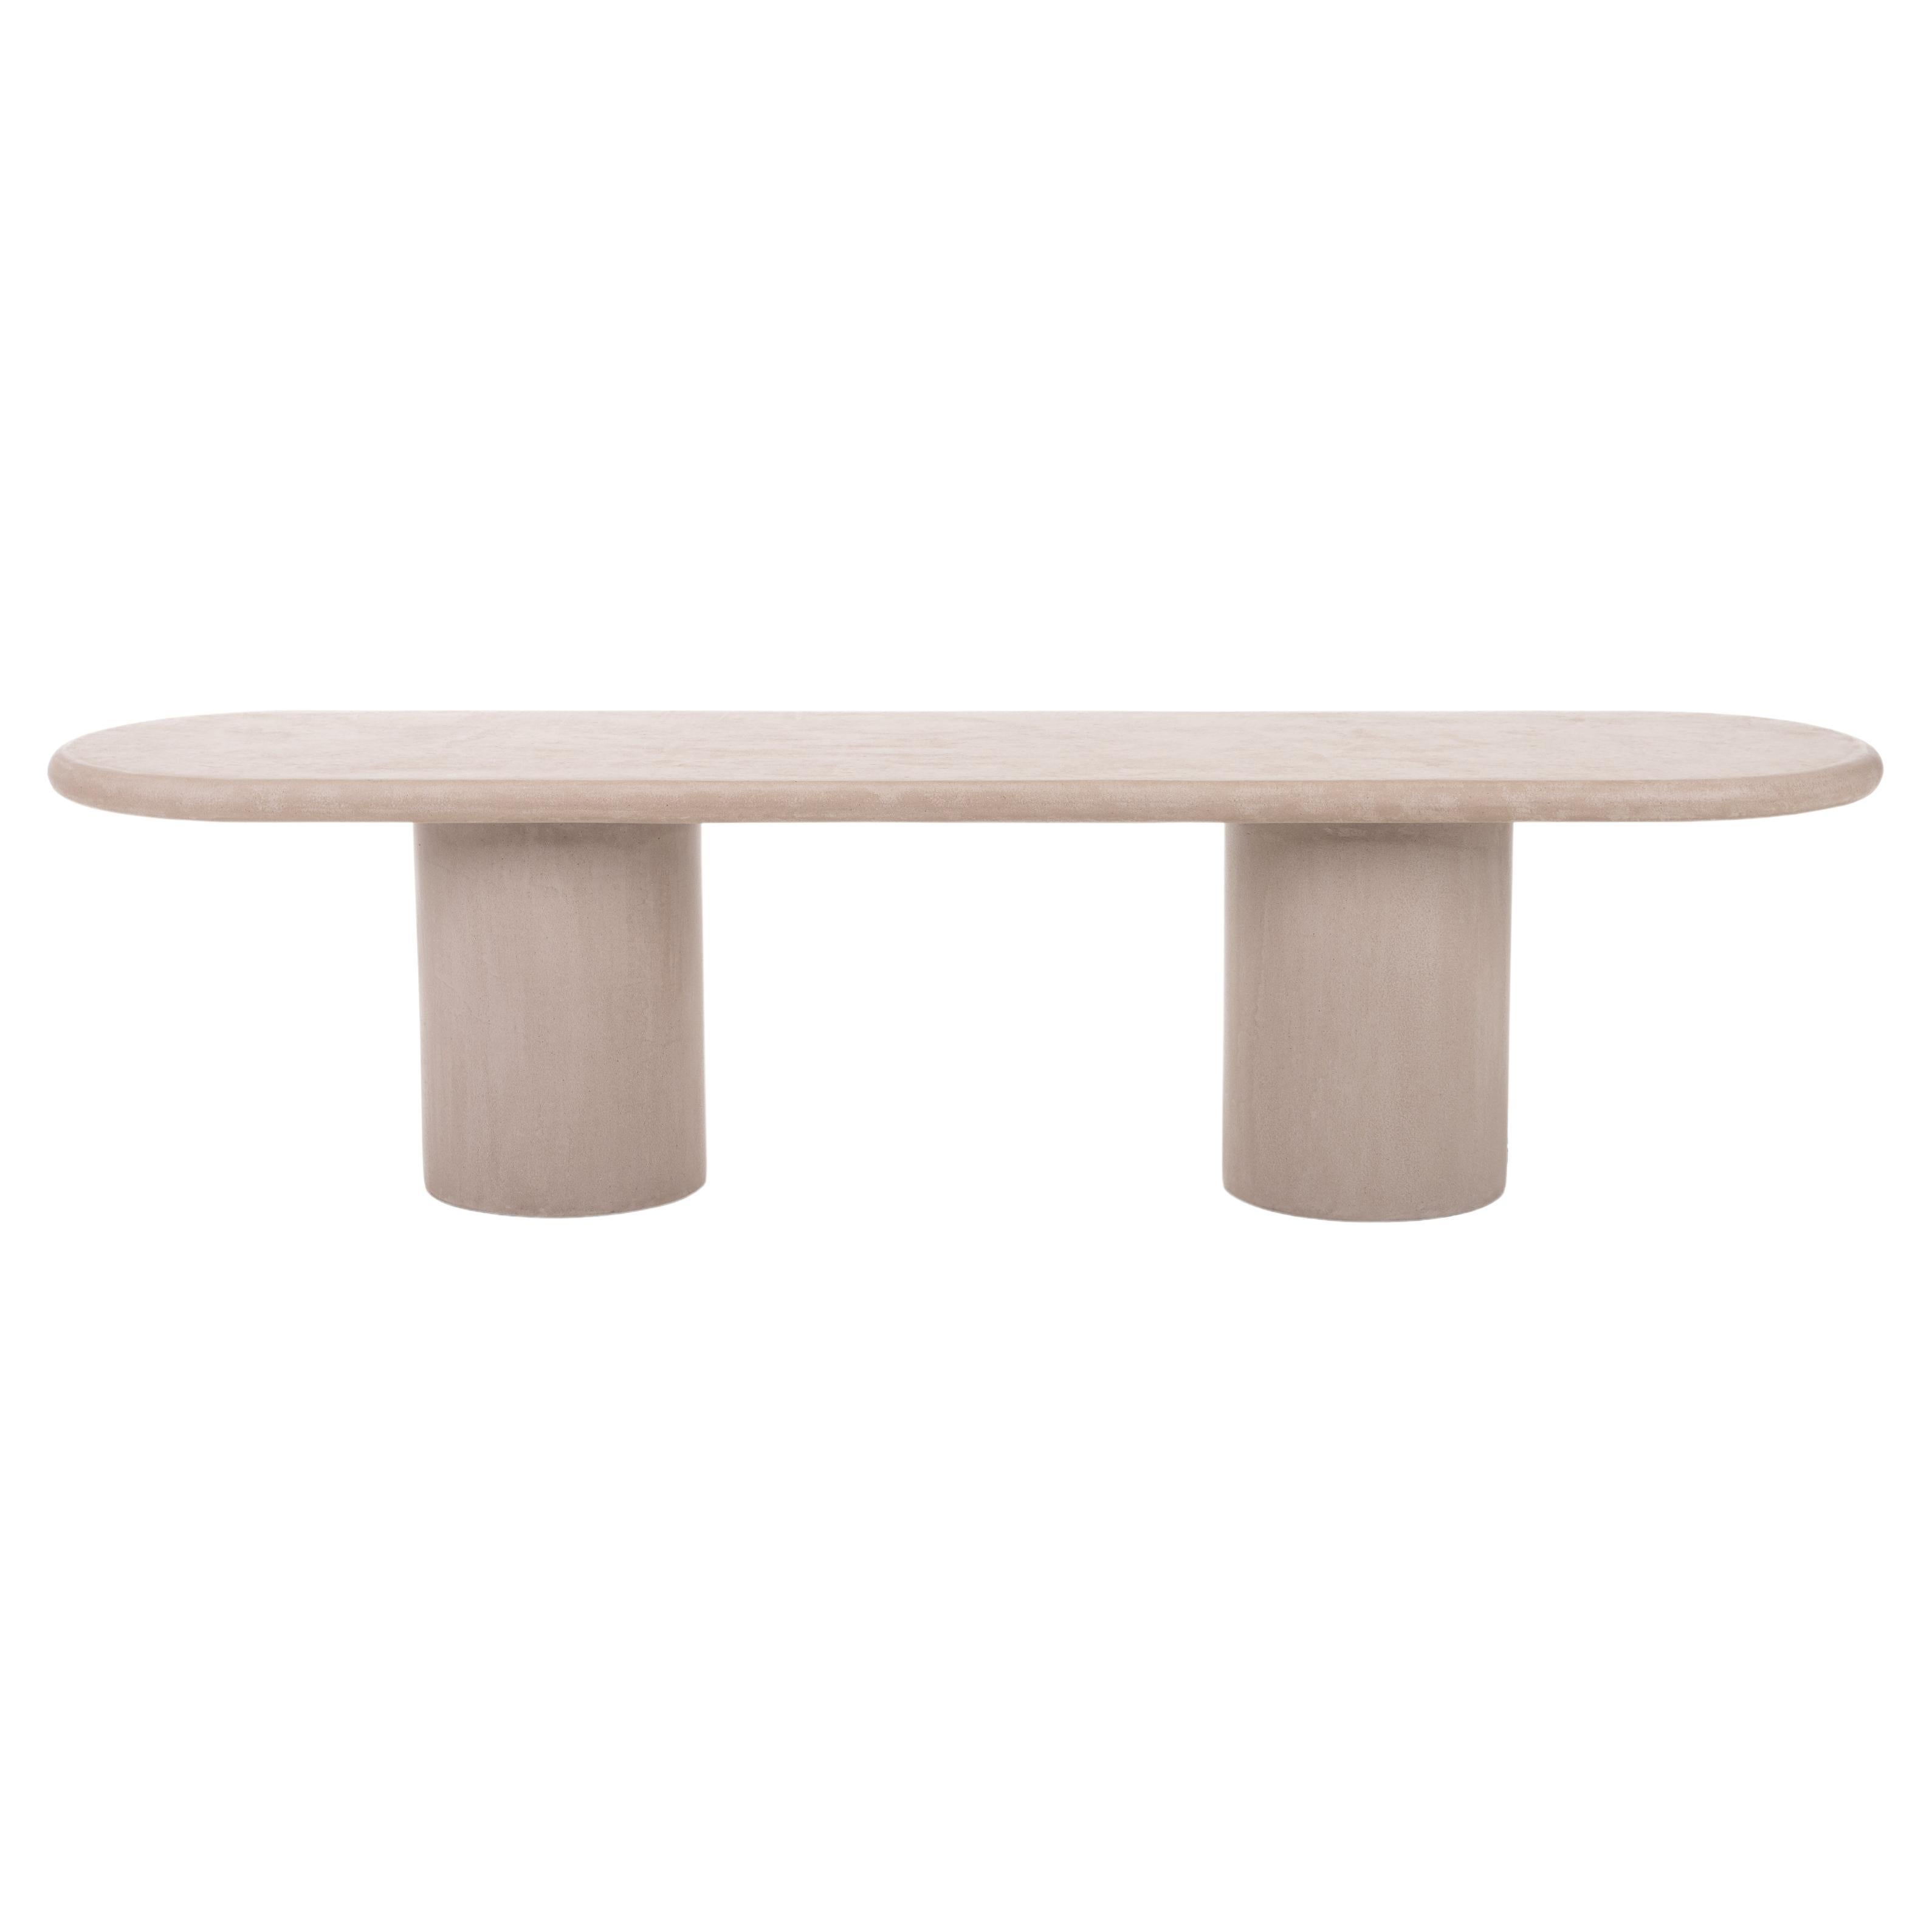 Mortex Bench "Column" 180 by Isabelle Beaumont For Sale